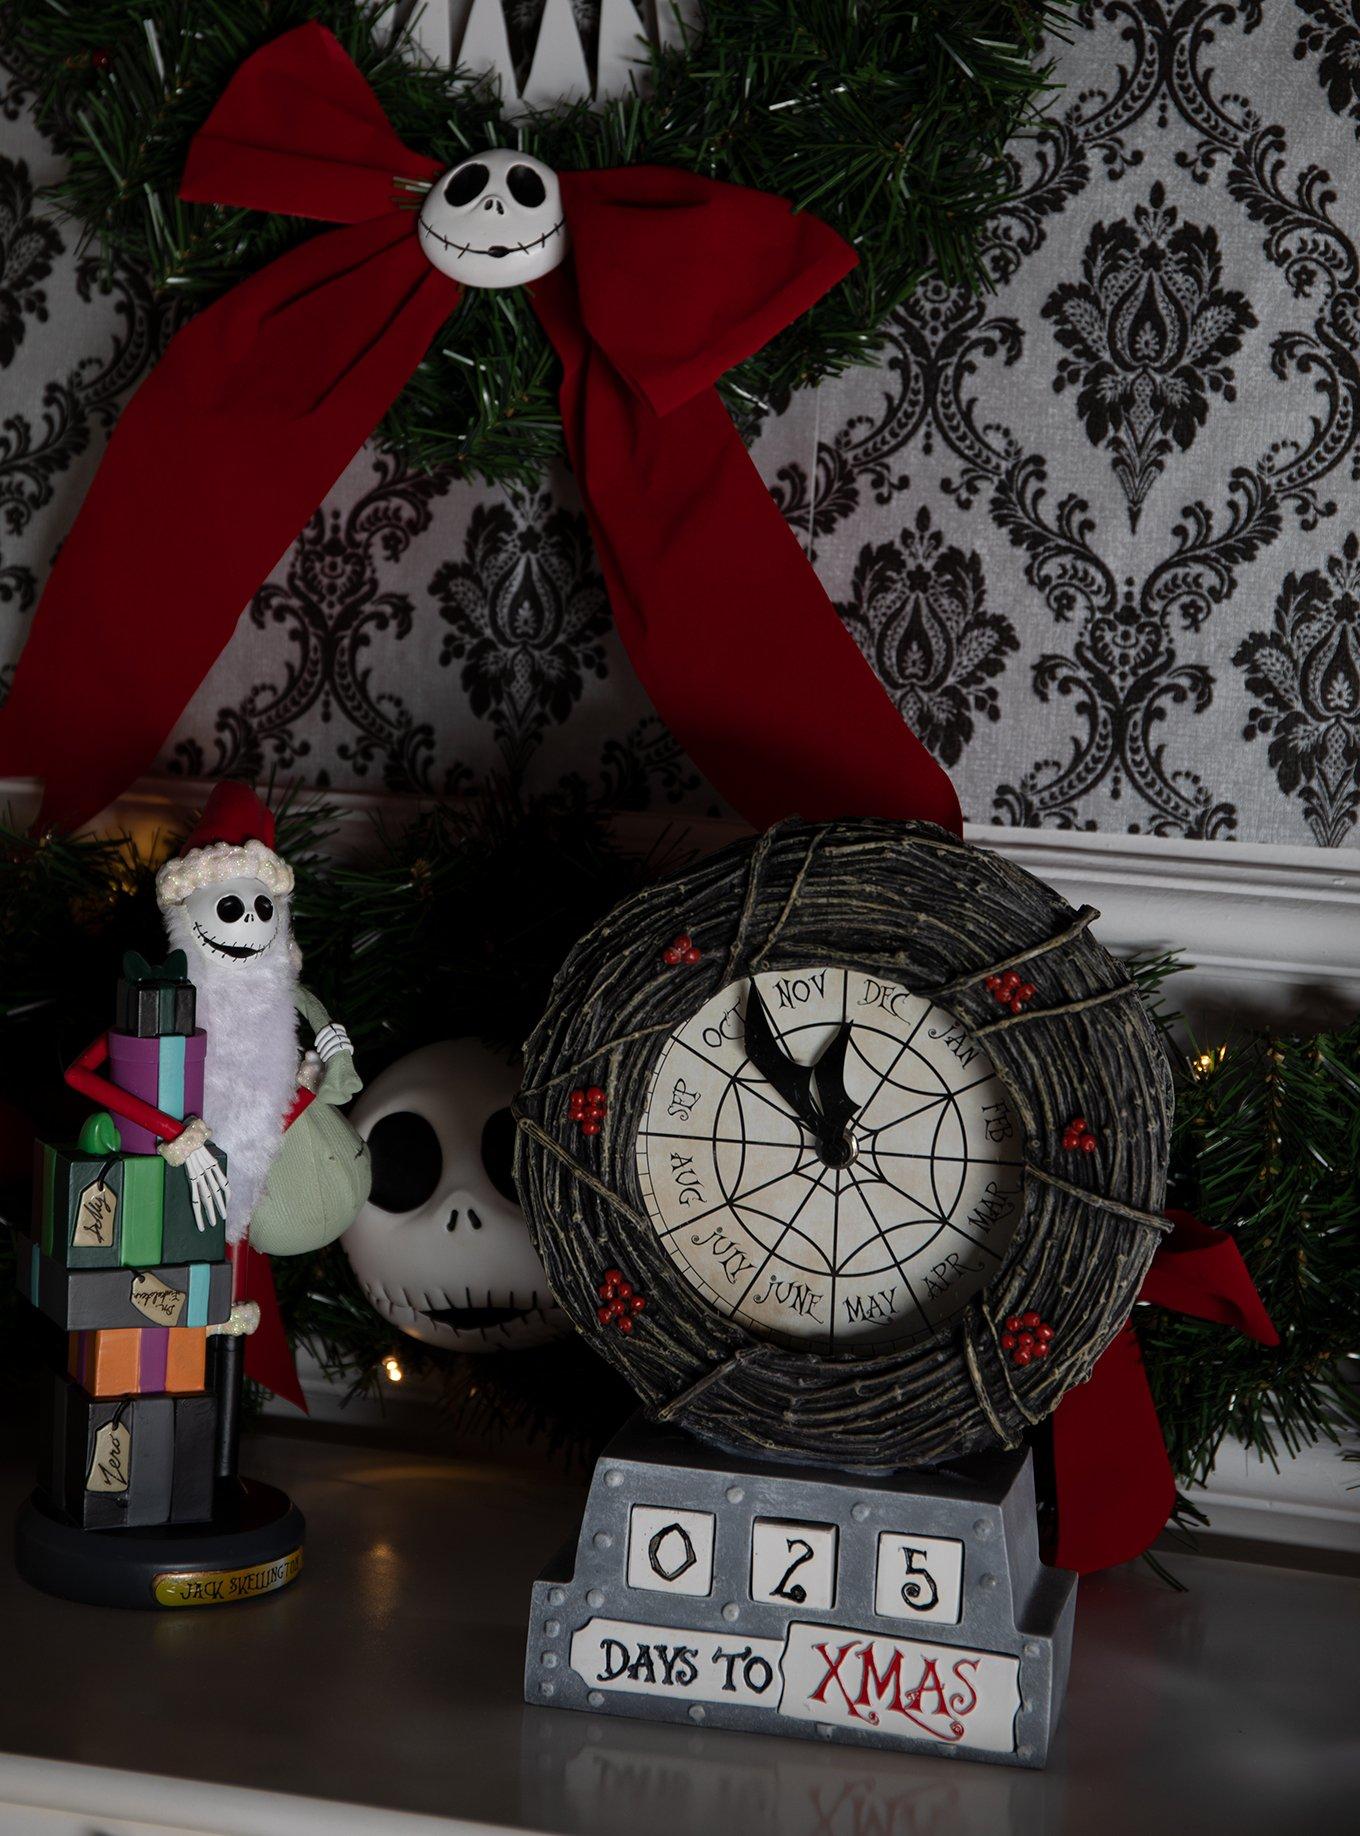 The Nightmare Before Christmas Countdown Table Clock Hot Topic Exclusive, , alternate